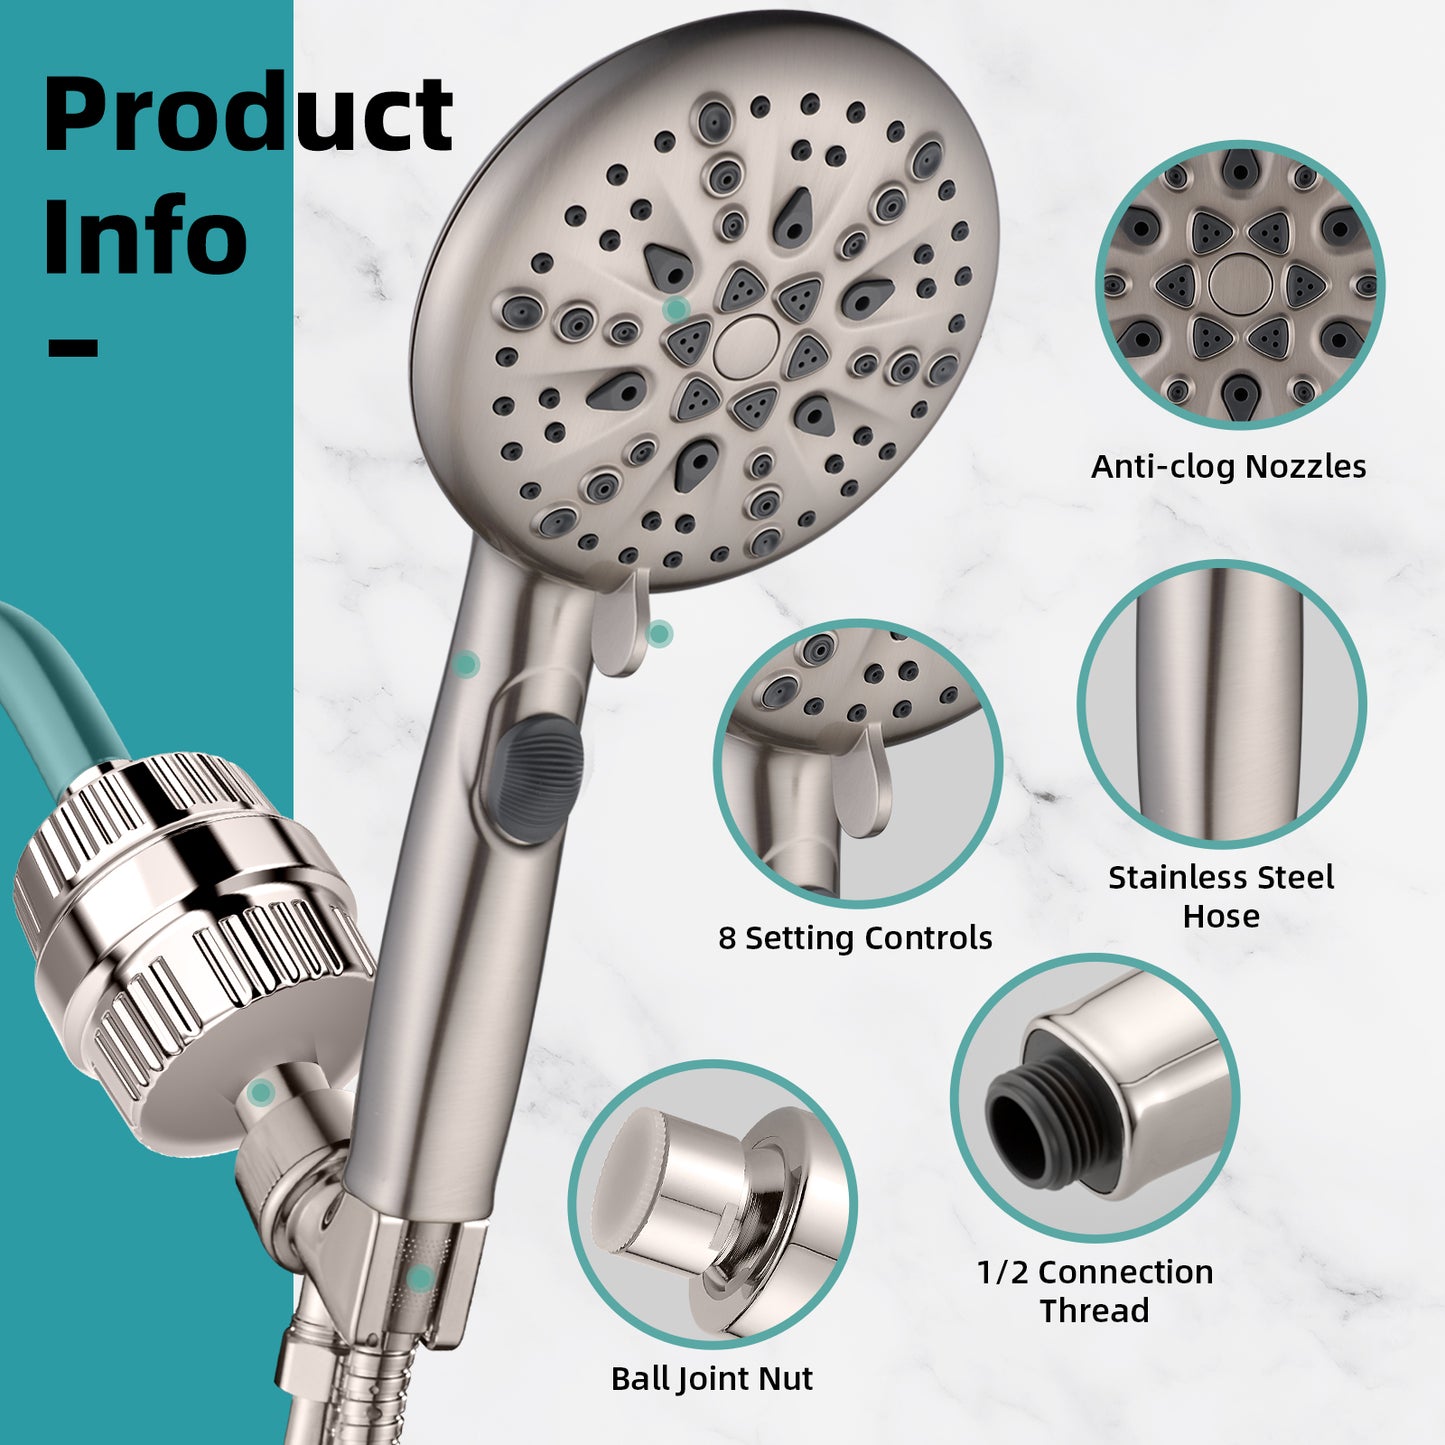 Cobbe High Pressure 9-Modes Filtered Shower Head - with 20 Stage Shower Filter for Hard Water, Removes Chlorine and Harmful Substances, Built-in Power Spray